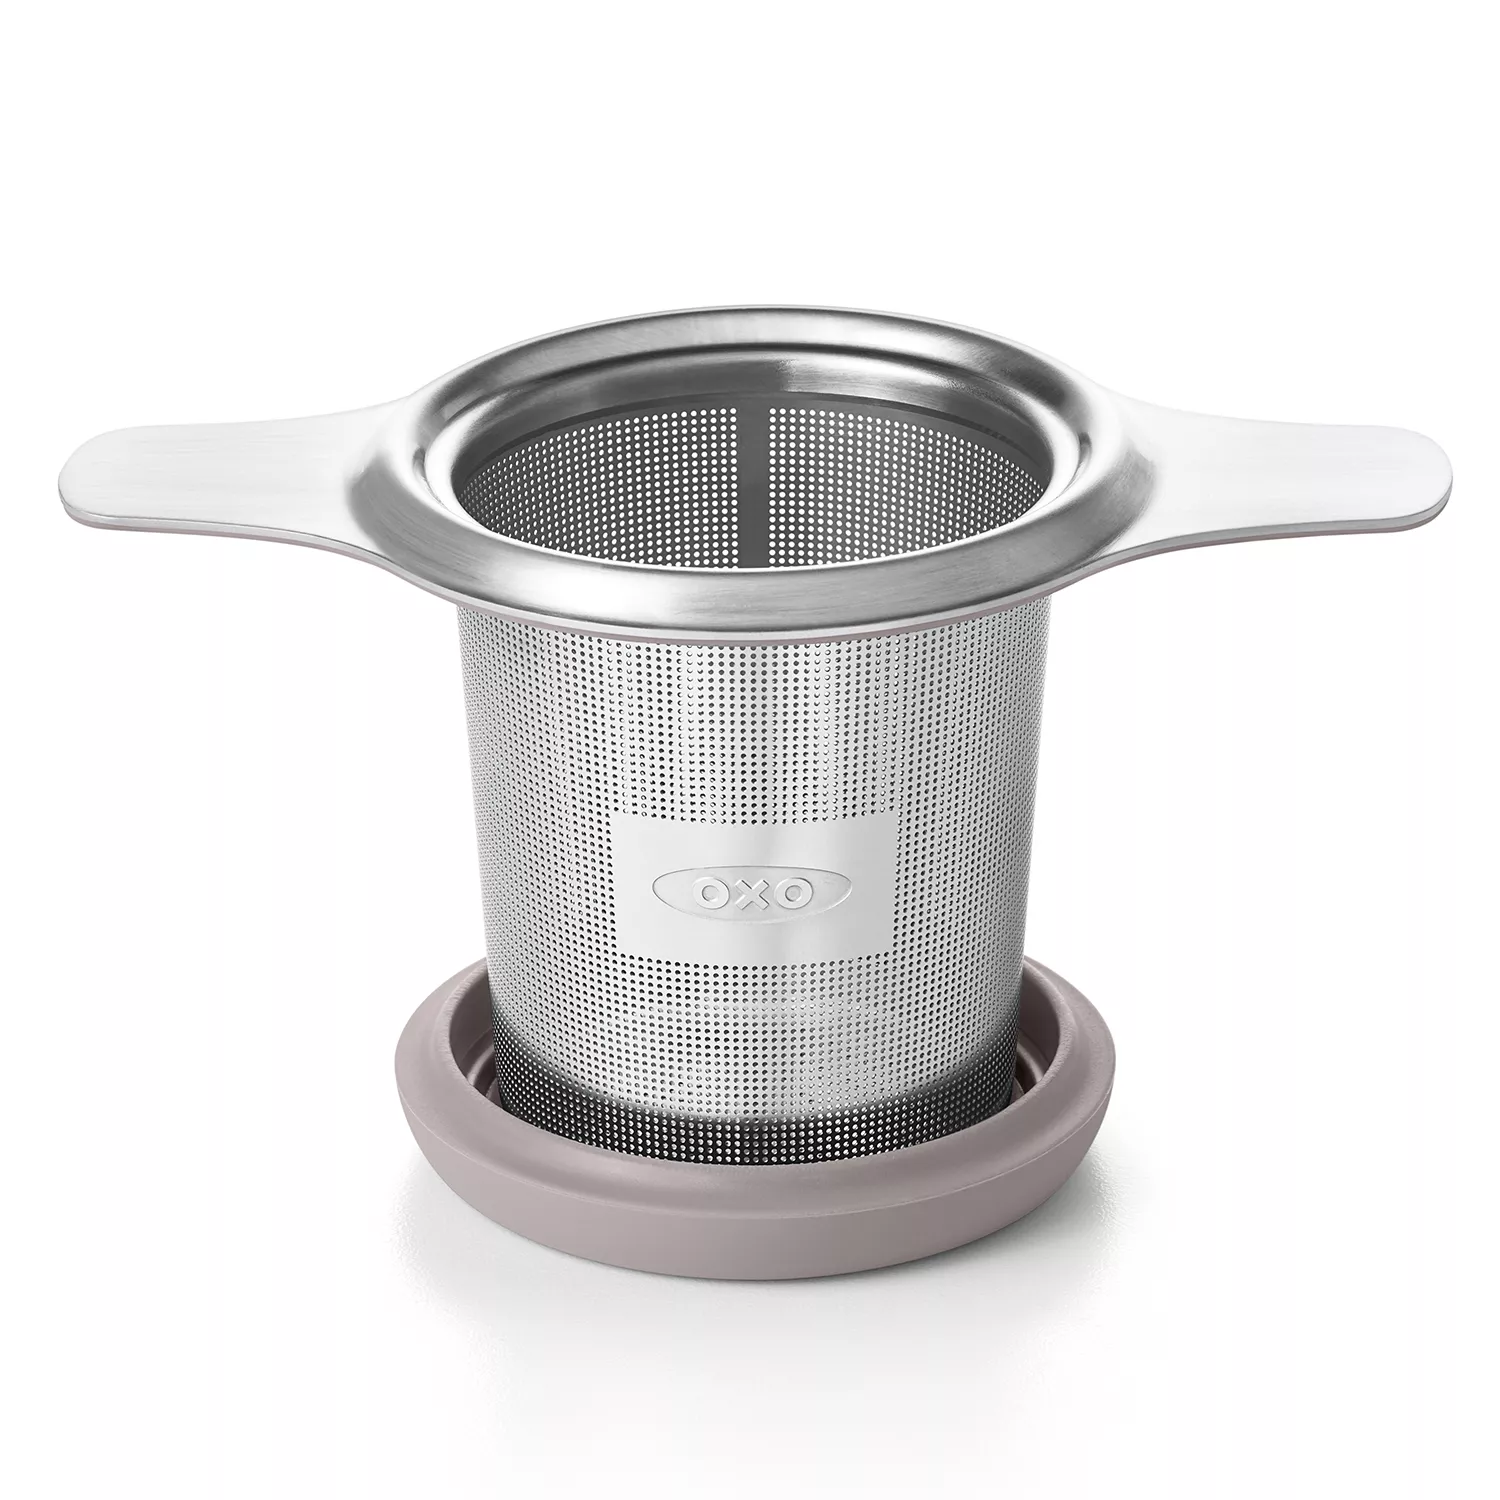 The Super Popular OXO Tool That (Finally) Made Me a Loose-Leaf-Tea Convert